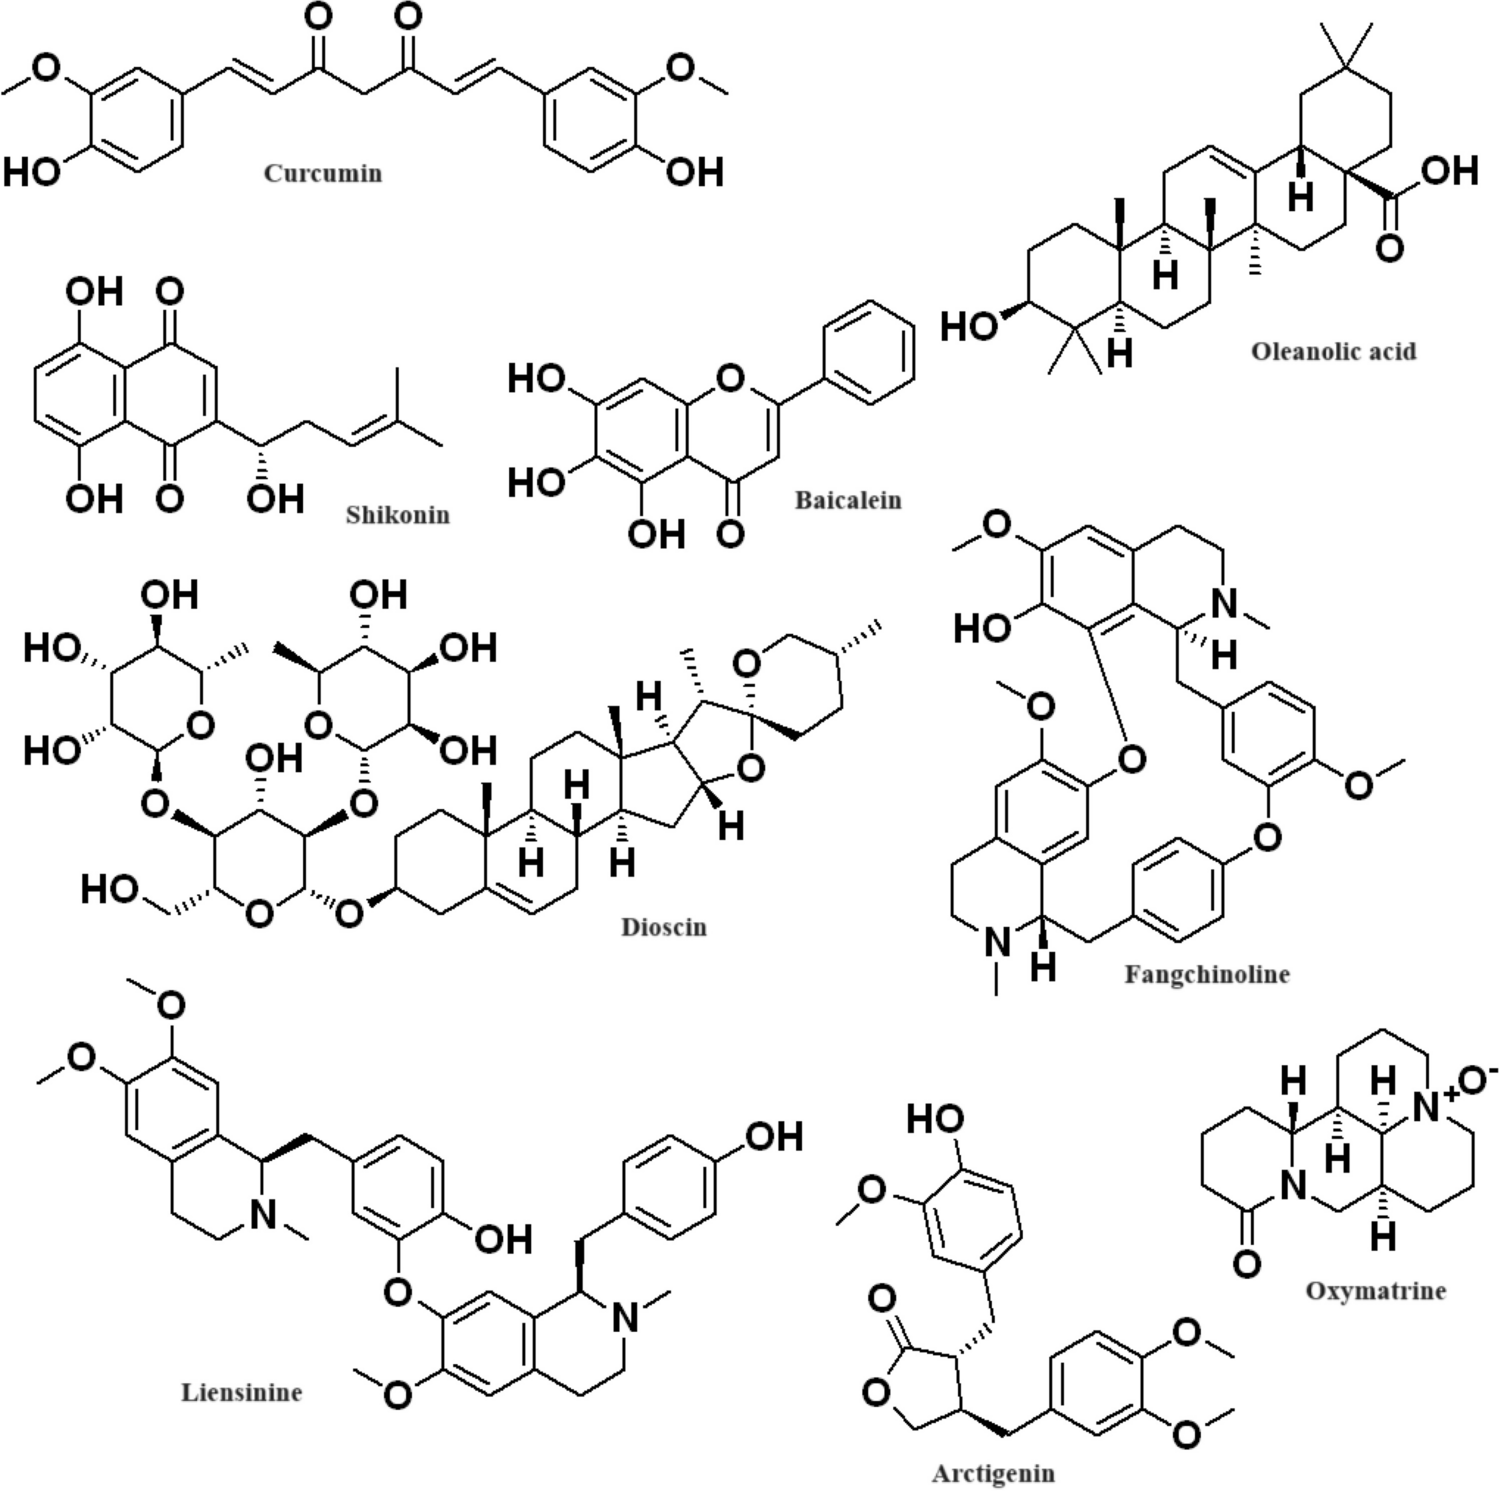 Natural products and long noncoding RNA signatures in gallbladder cancer: a review focuses on pathogenesis, diagnosis, and drug resistance